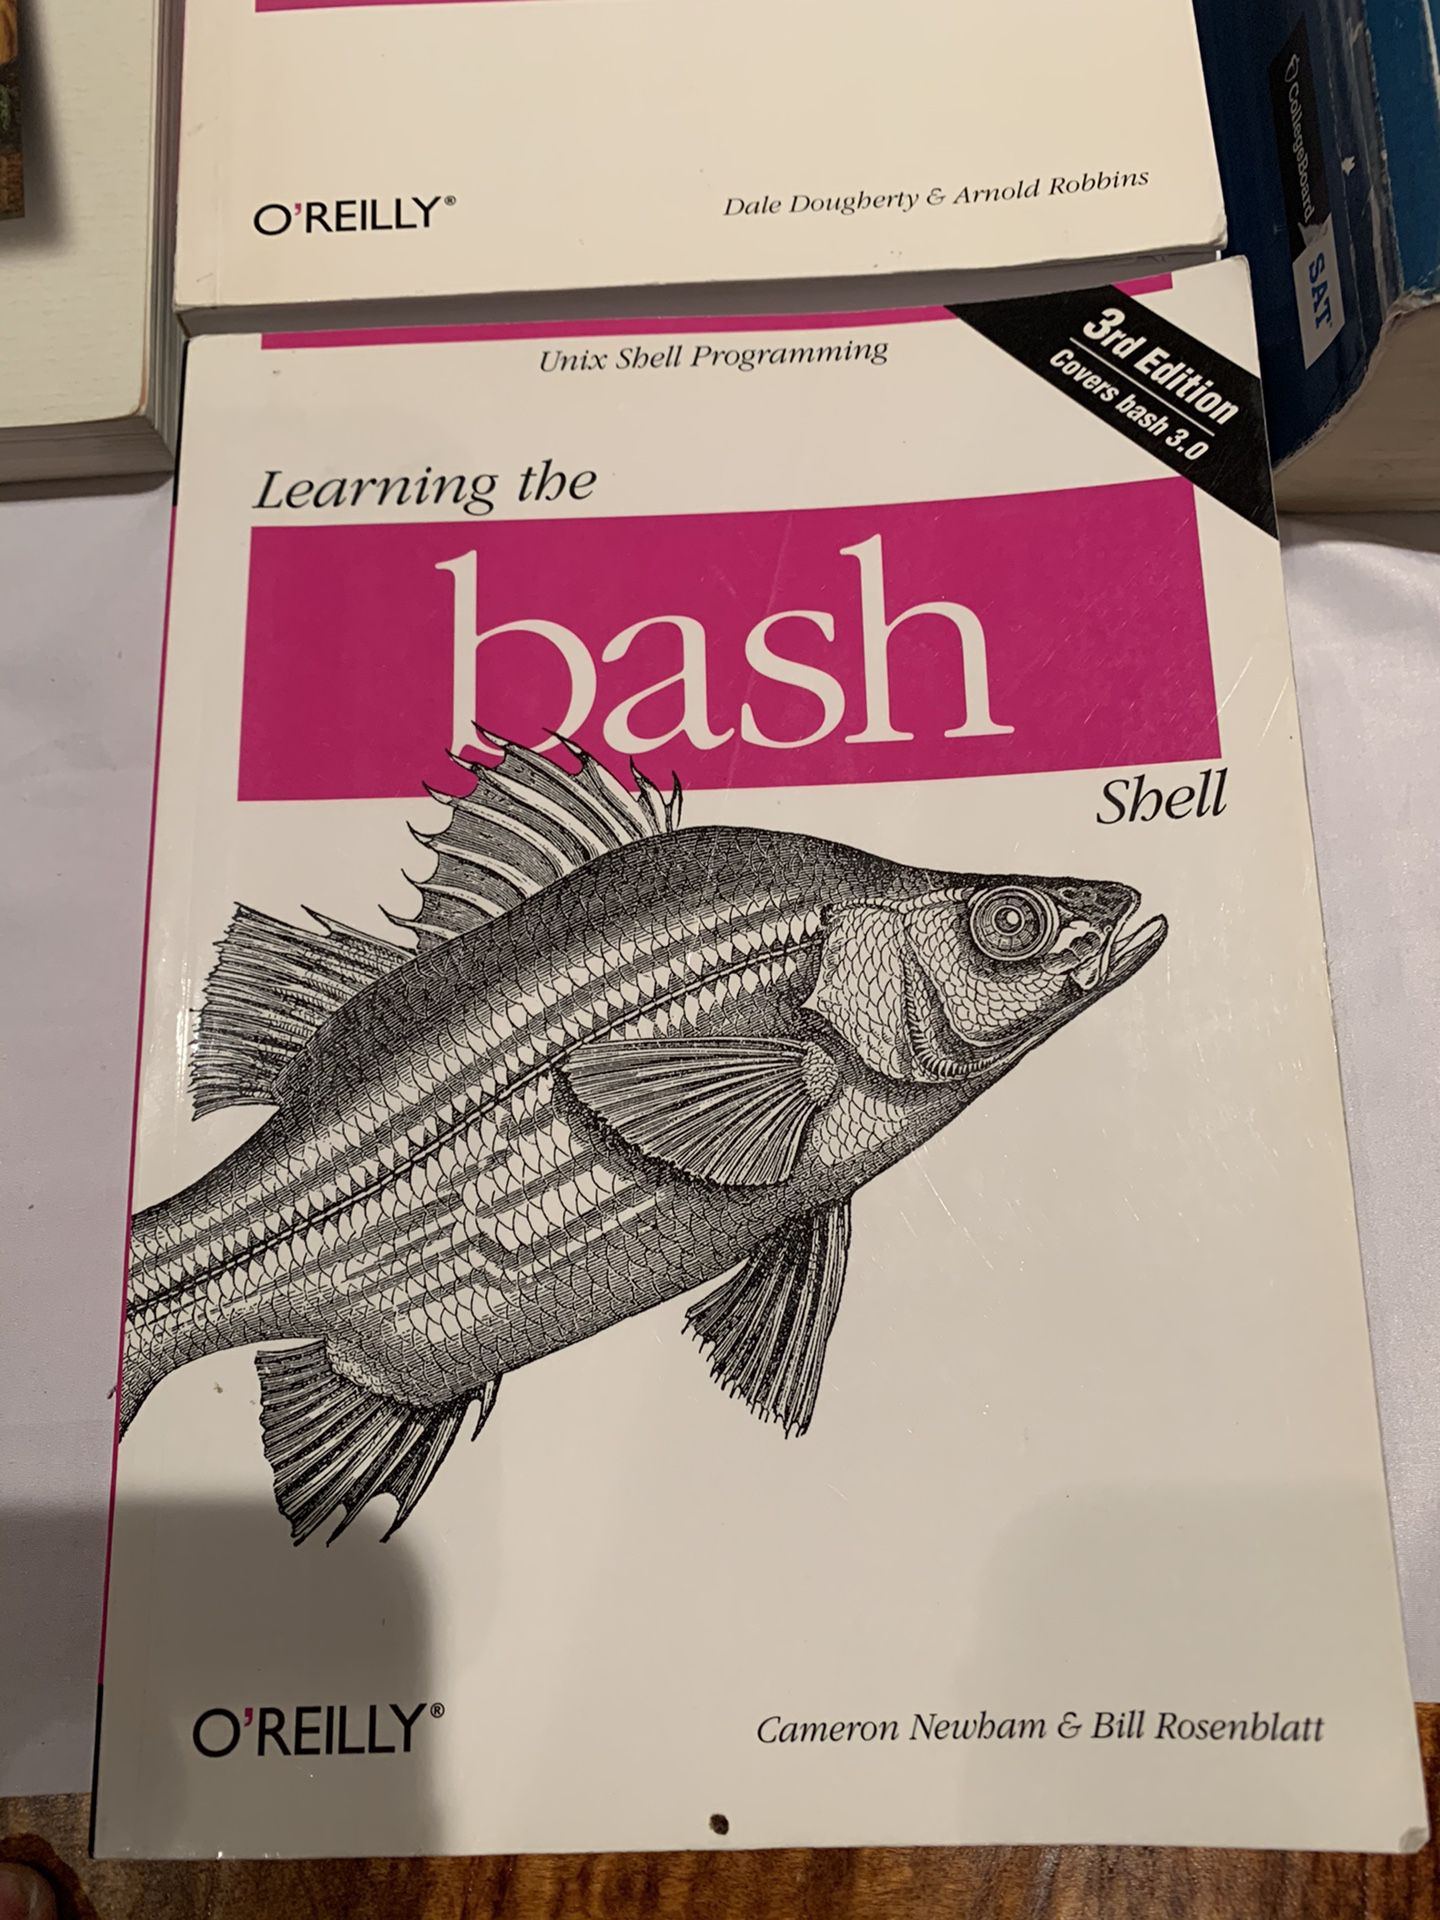 Learning the bash shell textbook